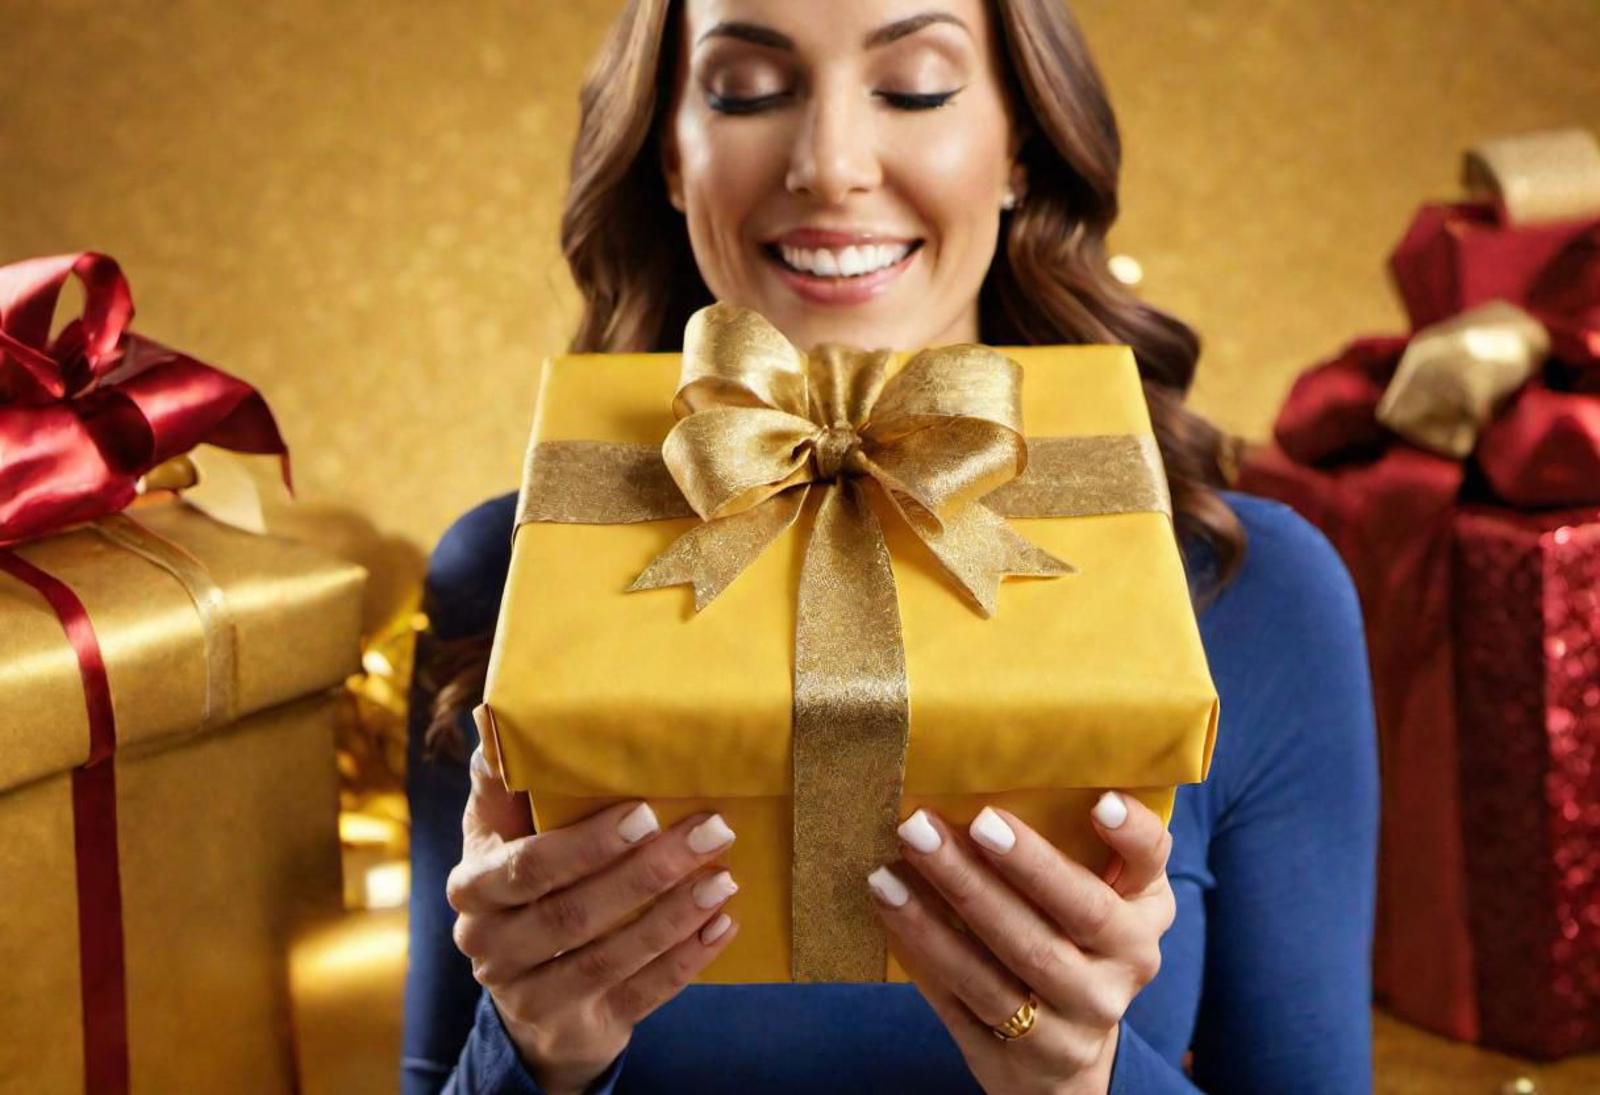 Unwrapping Sunshine: Experience the pure delight as someone tears into a brightly yellow Christmas present. The excitement...